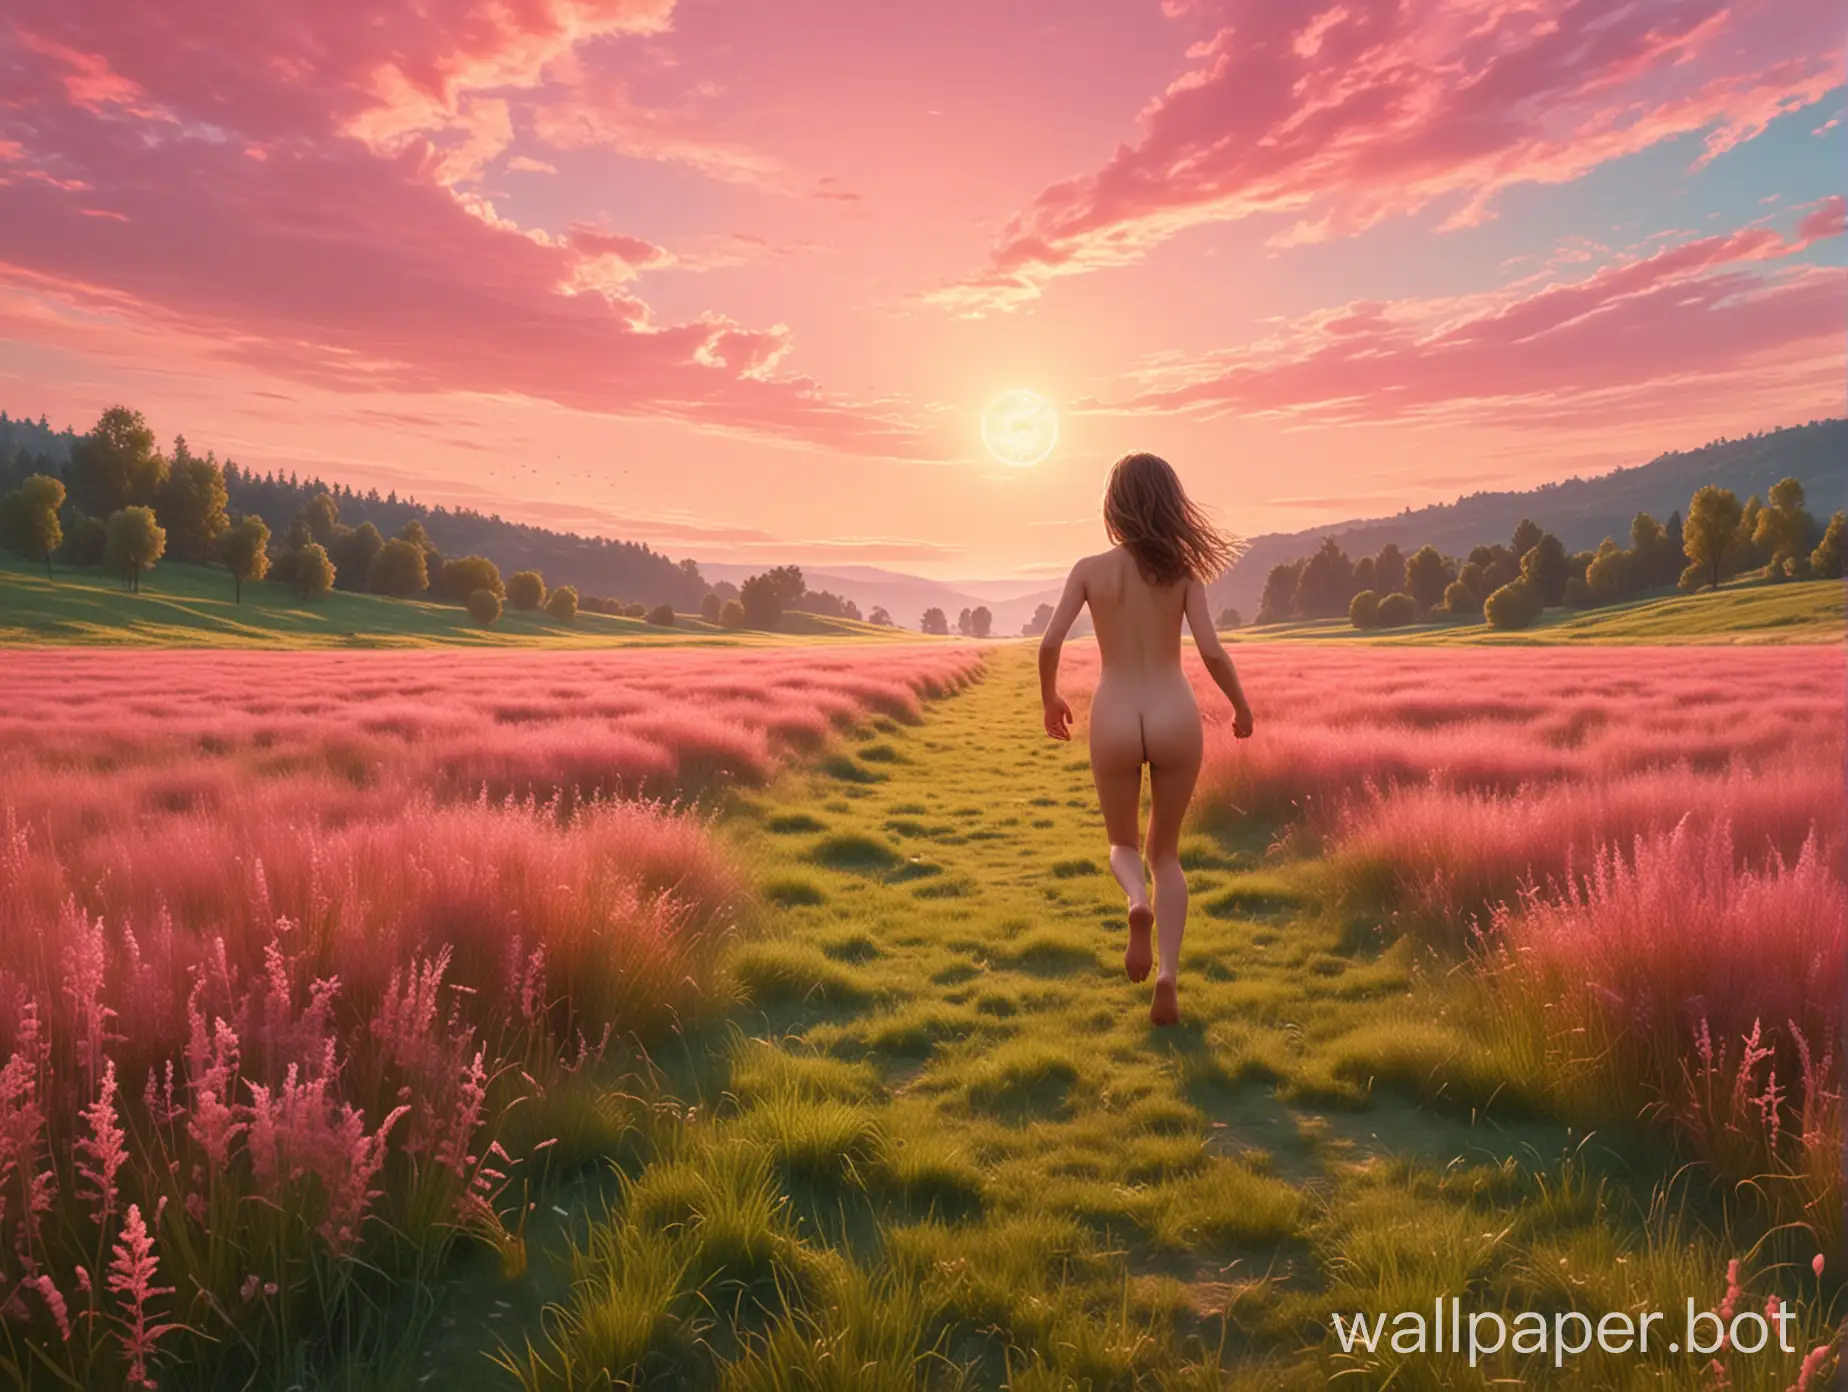 The happy nudist girl of 11 years old runs towards her dream across the meadow with pink grass under the gently-green sky, futurism baroque.